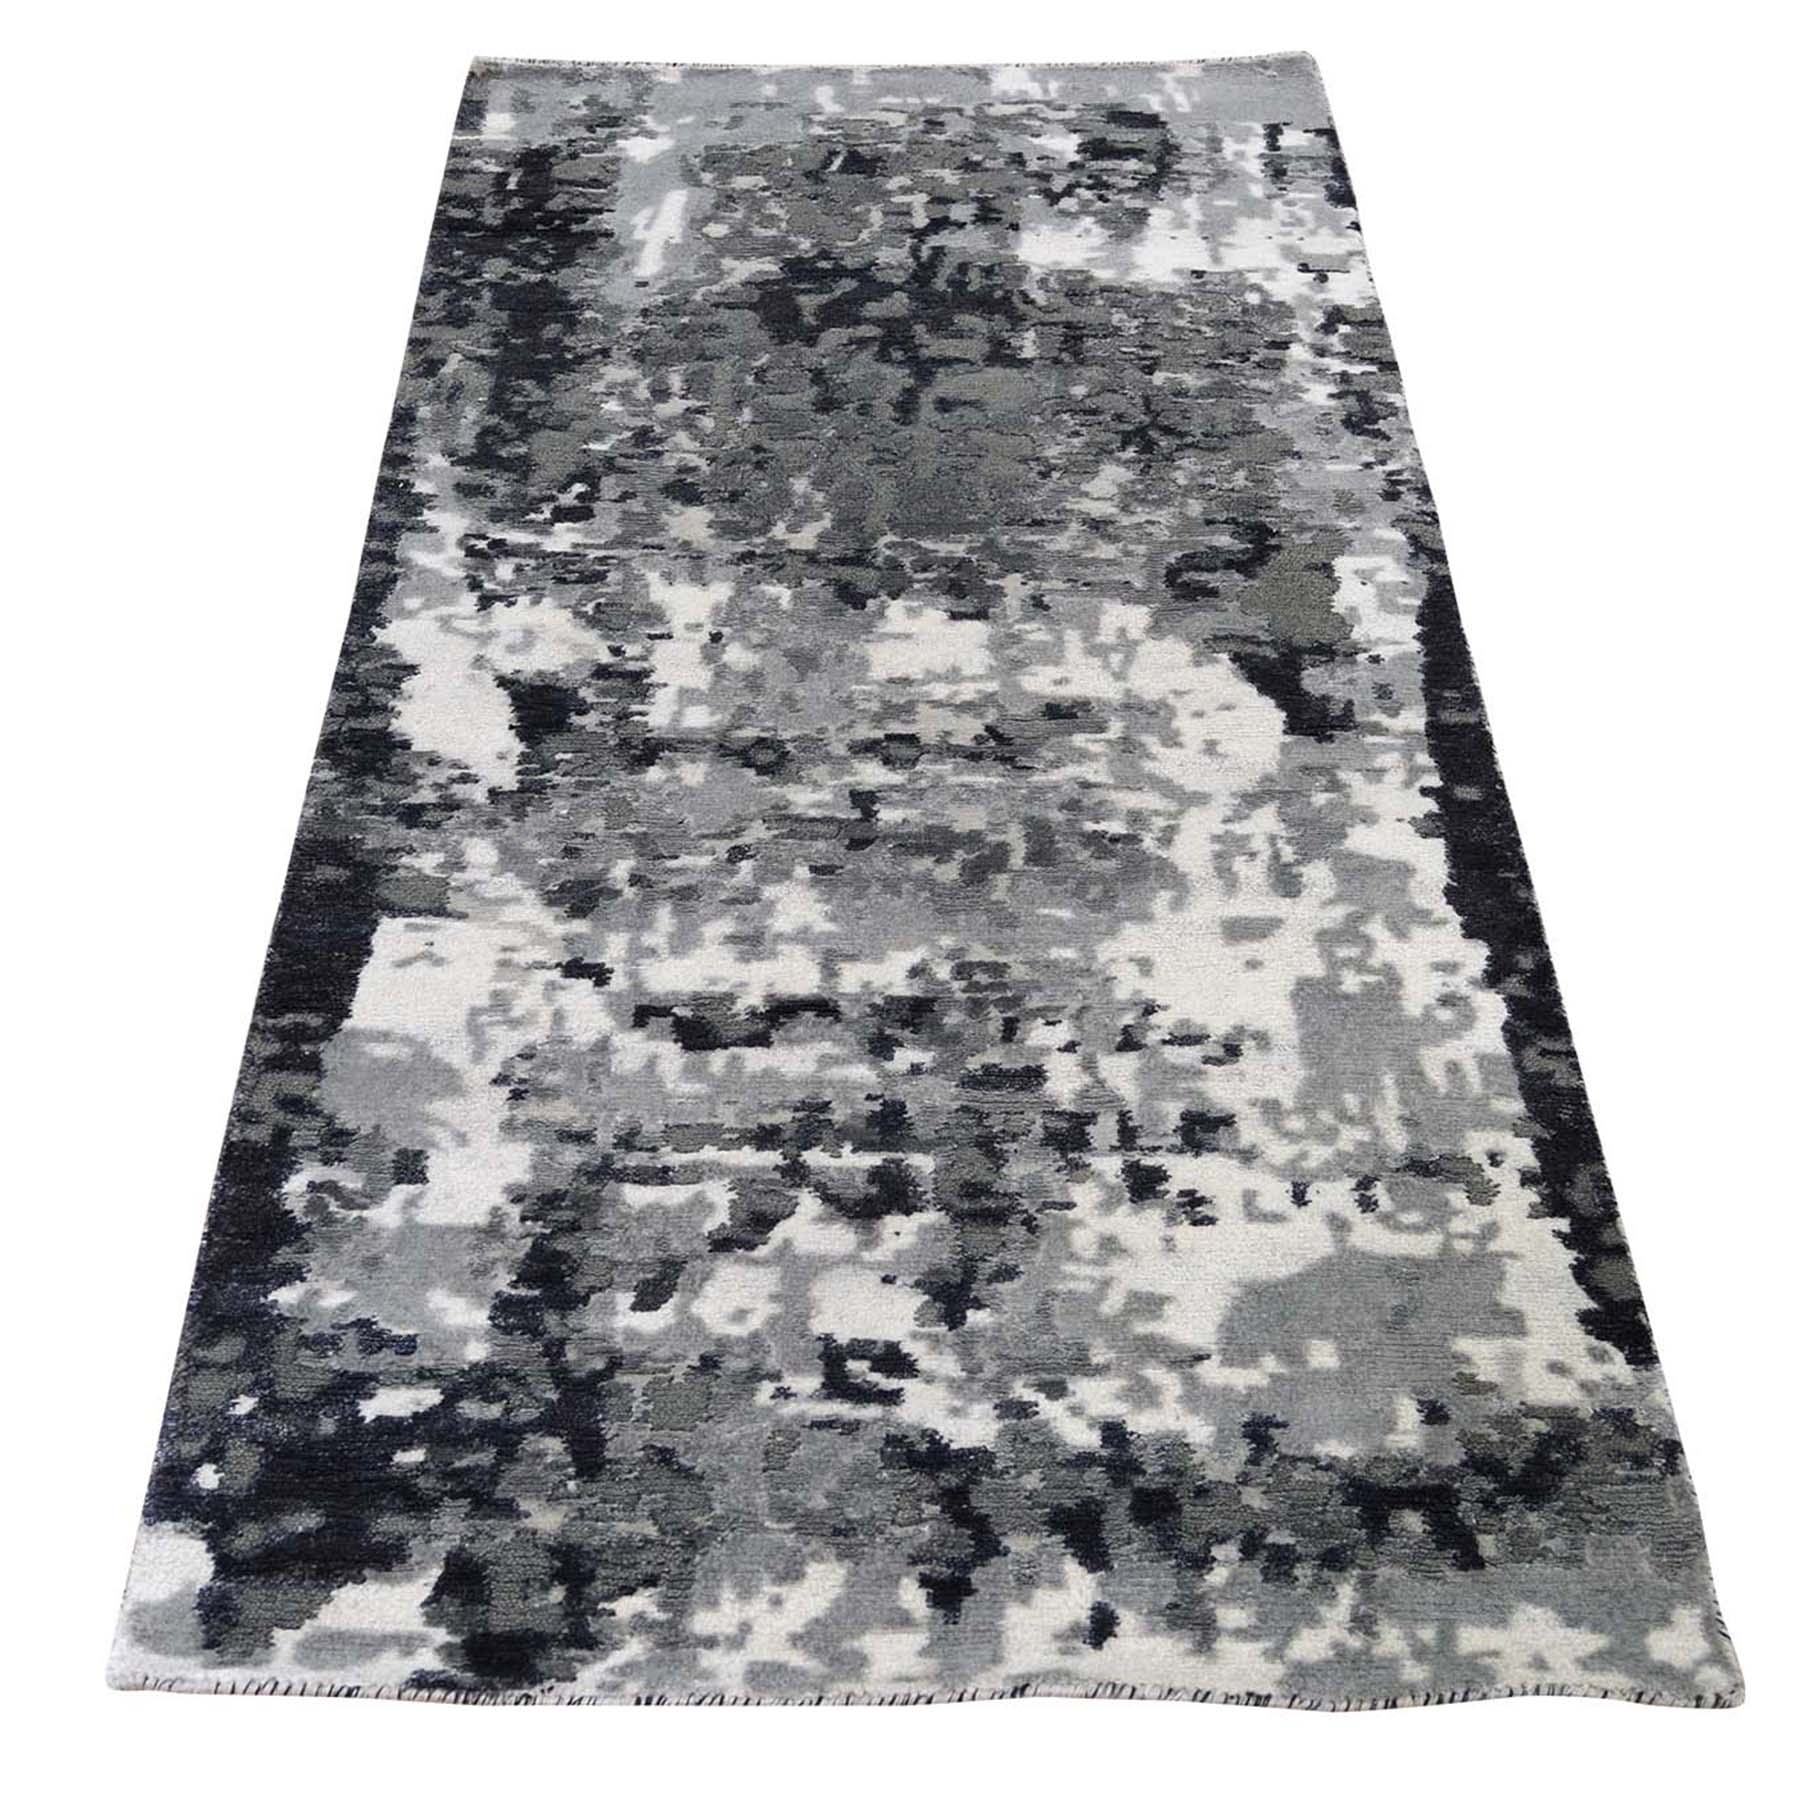 2'7"x5'9" Hi-Low Pile Abstract Design Wool And Silk Runner Hand Woven Oriental Rug 